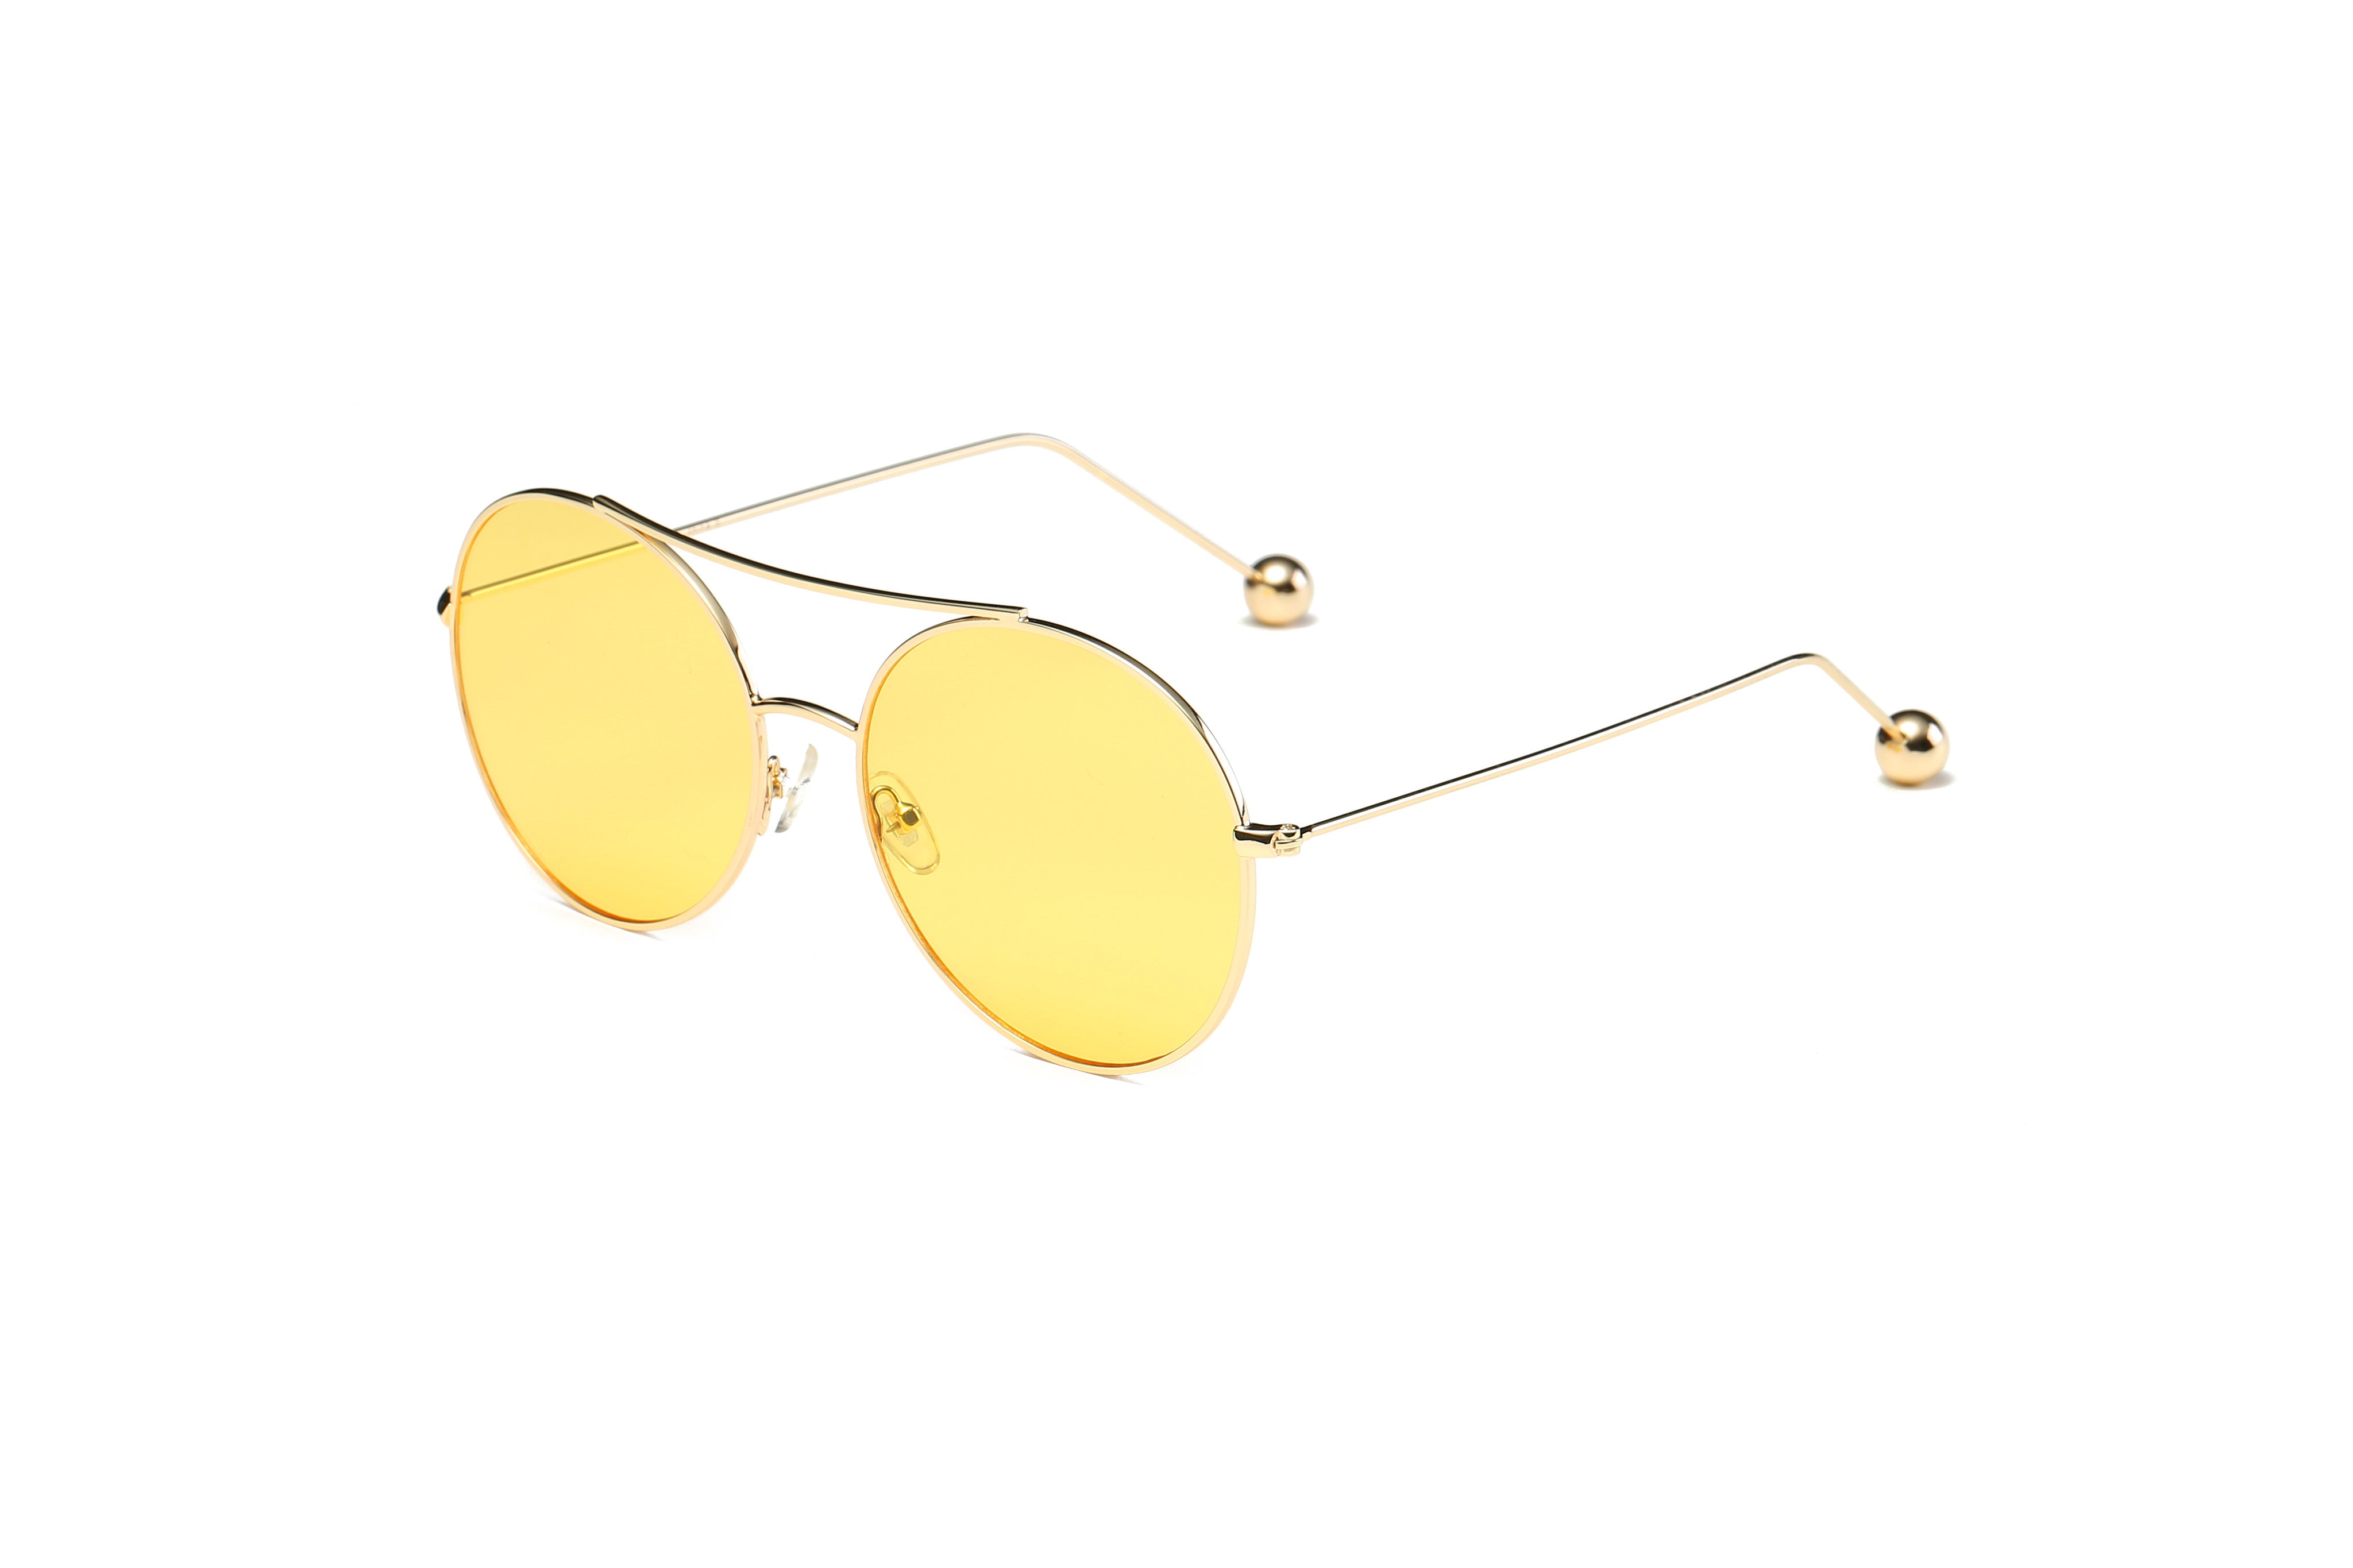 S1016 - Unisex Round Tinted Lens Sunglasses Yellow lens with GOLD frame